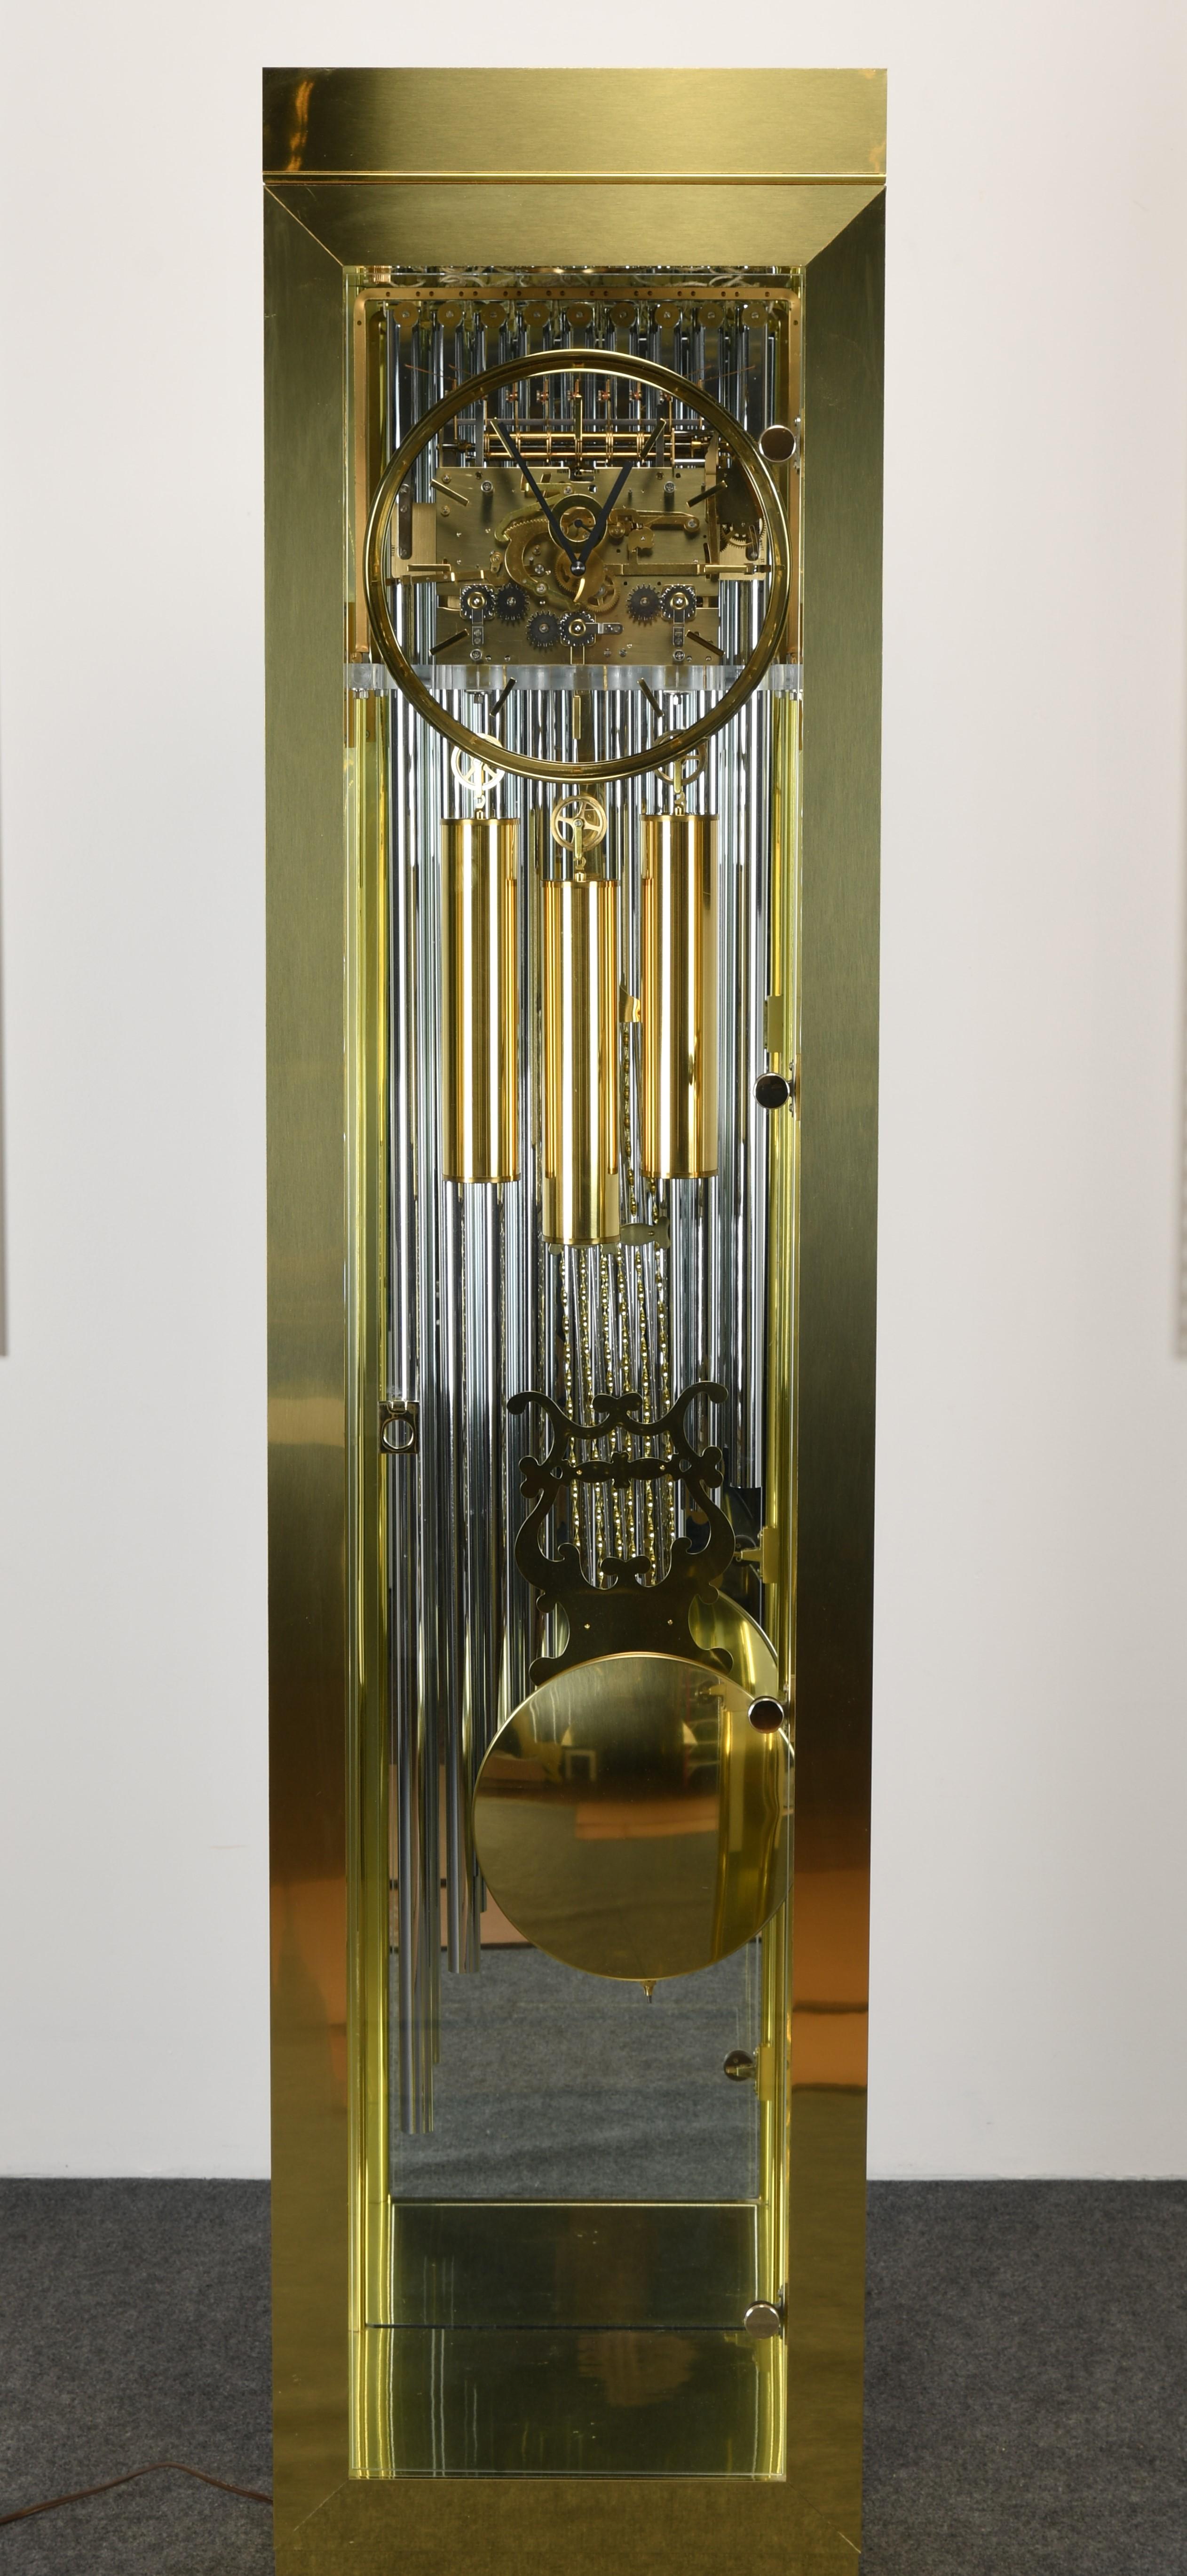 A fabulous Howard Miller Grandfather Clock with a brass skeleton frame. The clock is in very good condition with a few minor dings to the floor from weights. The chimes have a beautiful sound and the clock lights up as well, as shown in images. This